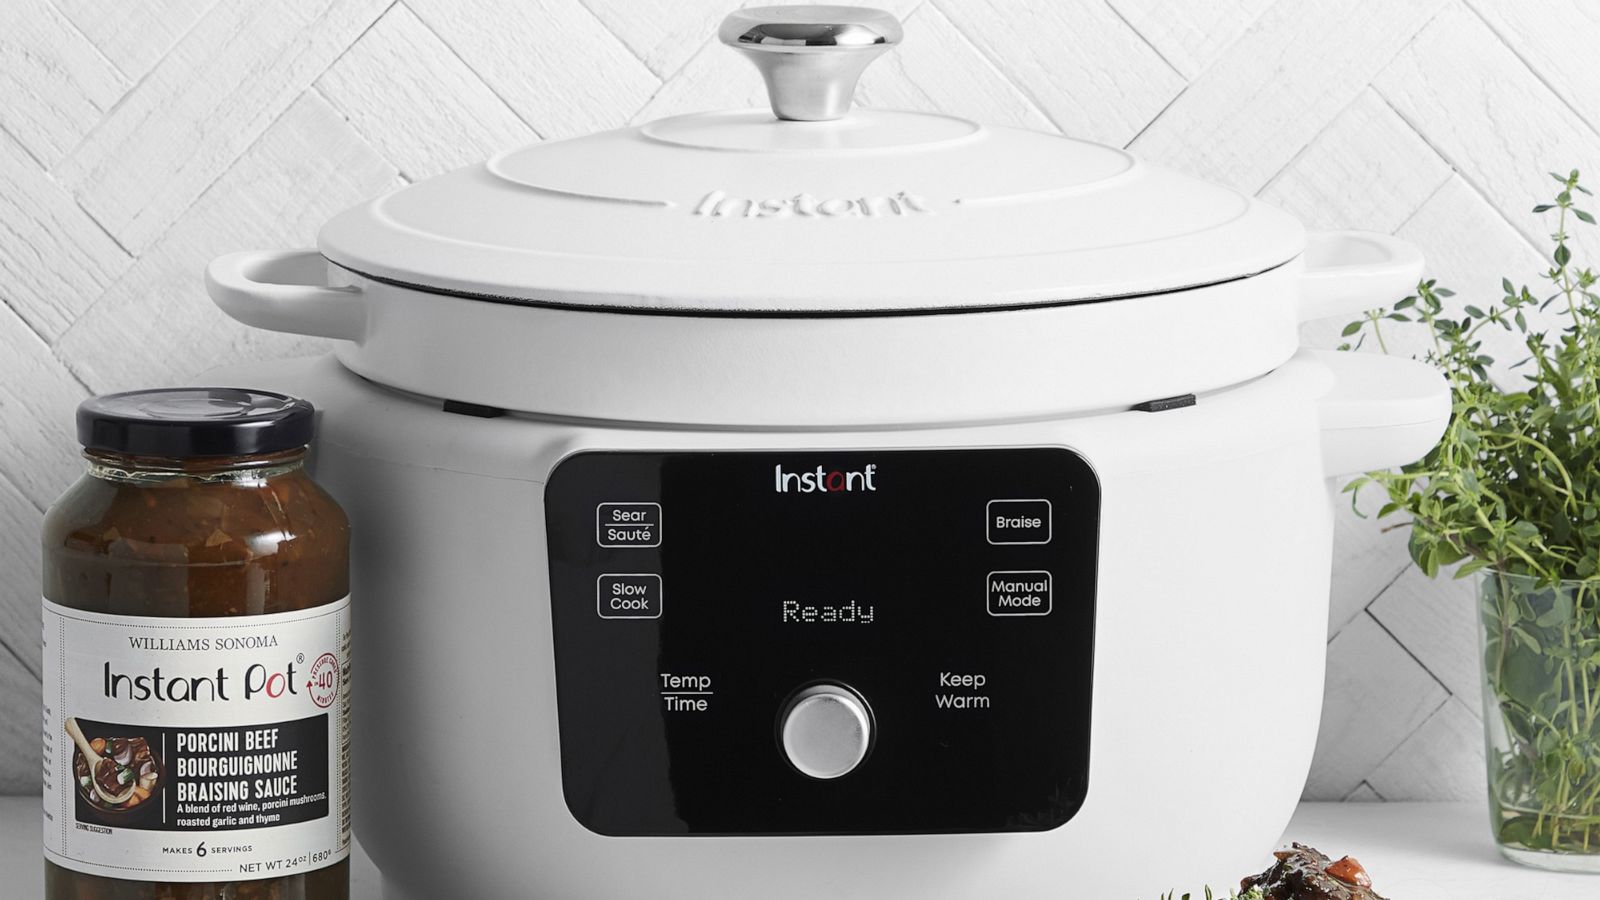 Crock-Pot 4 Quart Stainless Steel Cook & Carry Programmable Slow Cooker  with Lid, 1 Piece - Ralphs